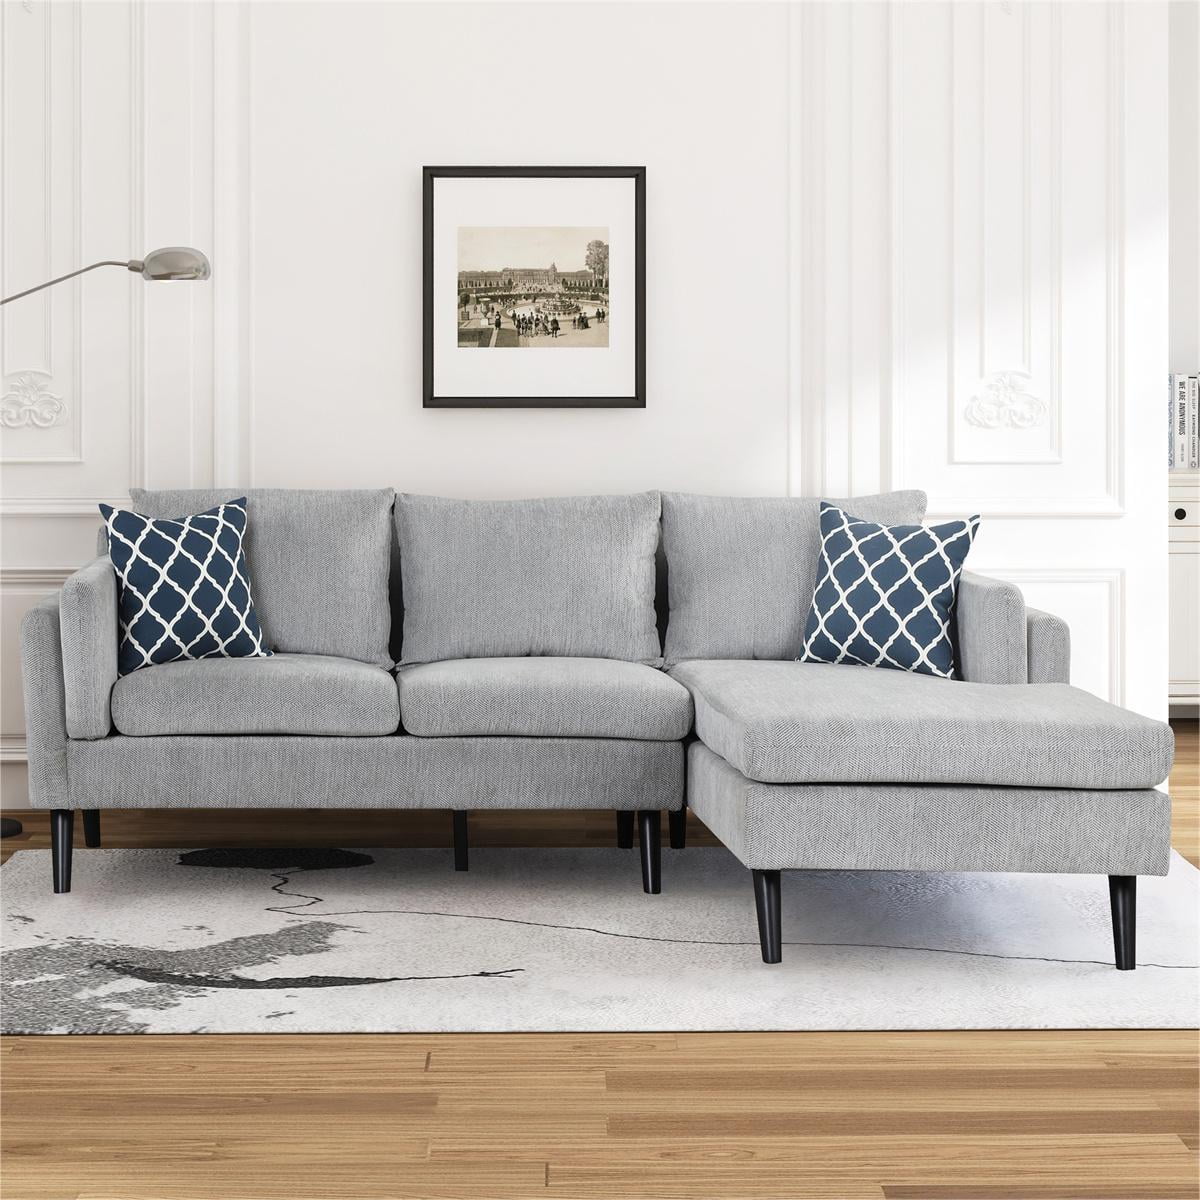 Seater Sectional Sofa